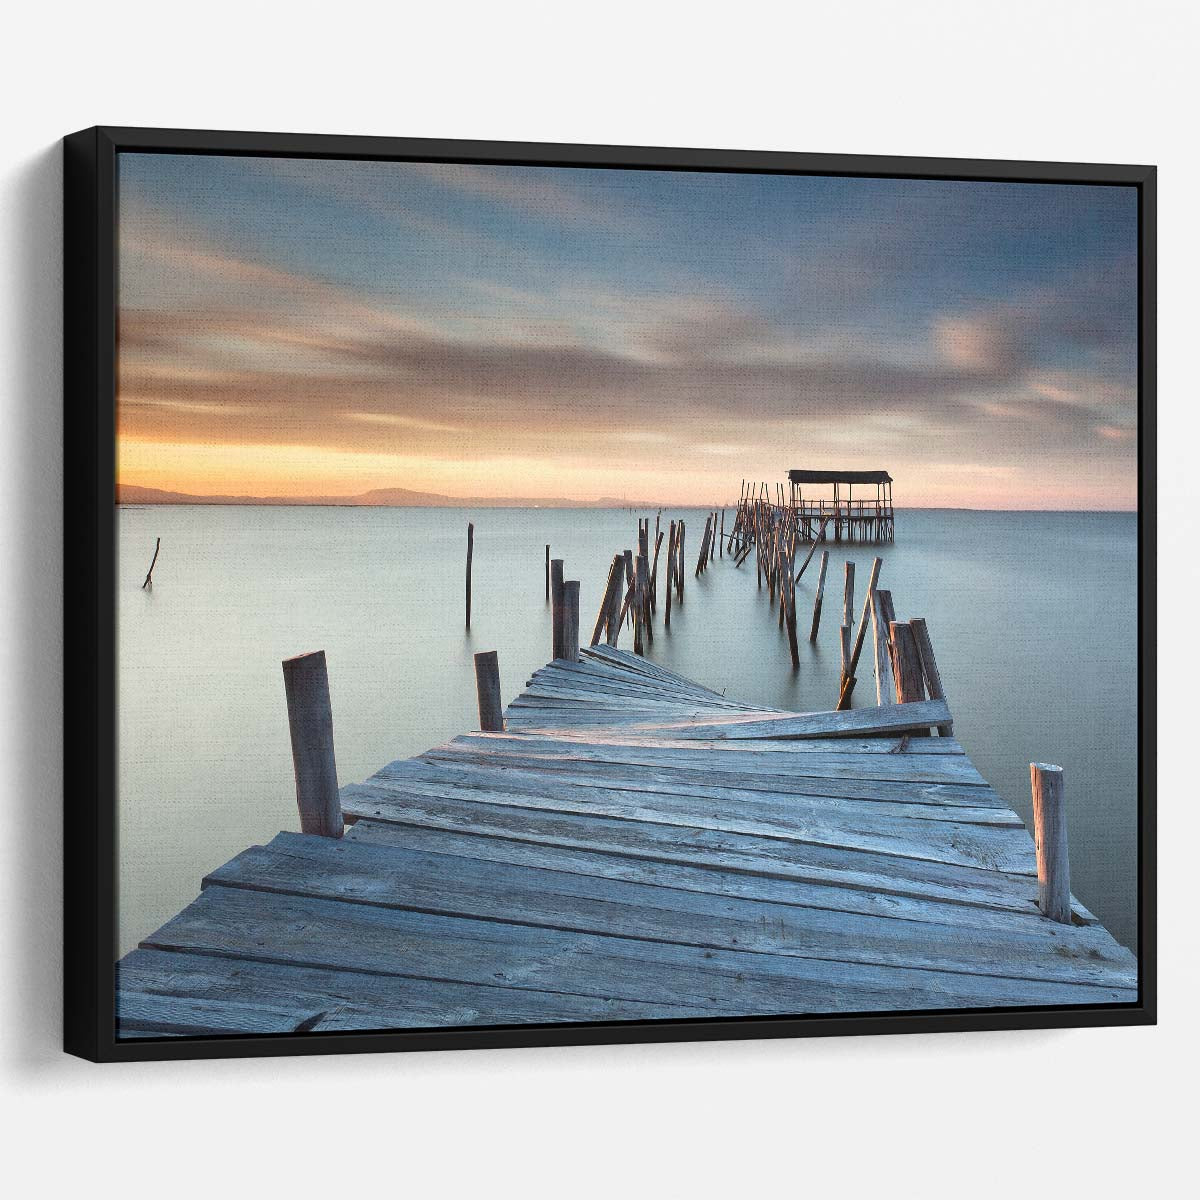 Decaying Pier Sunset Seascape Portugal Wall Art by Luxuriance Designs. Made in USA.